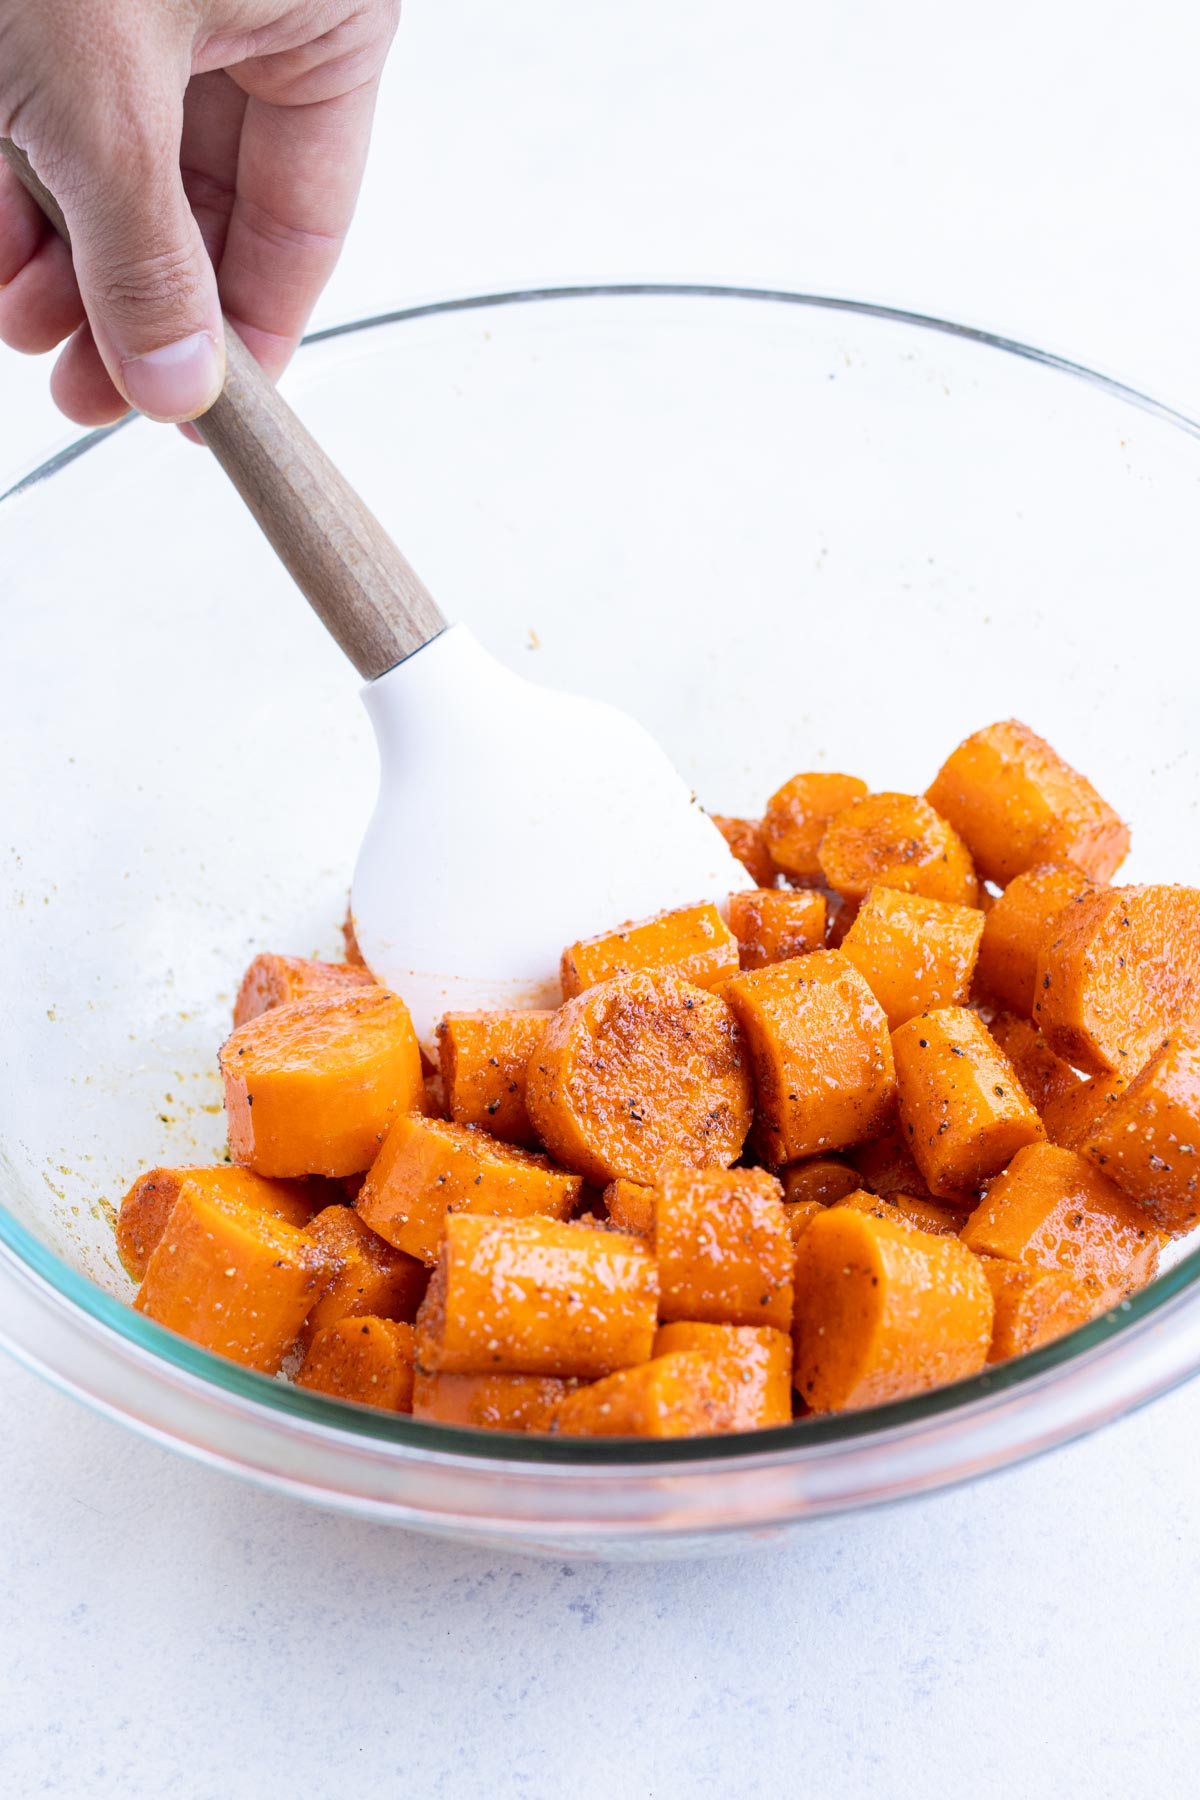 Carrots are covered with seasoning.